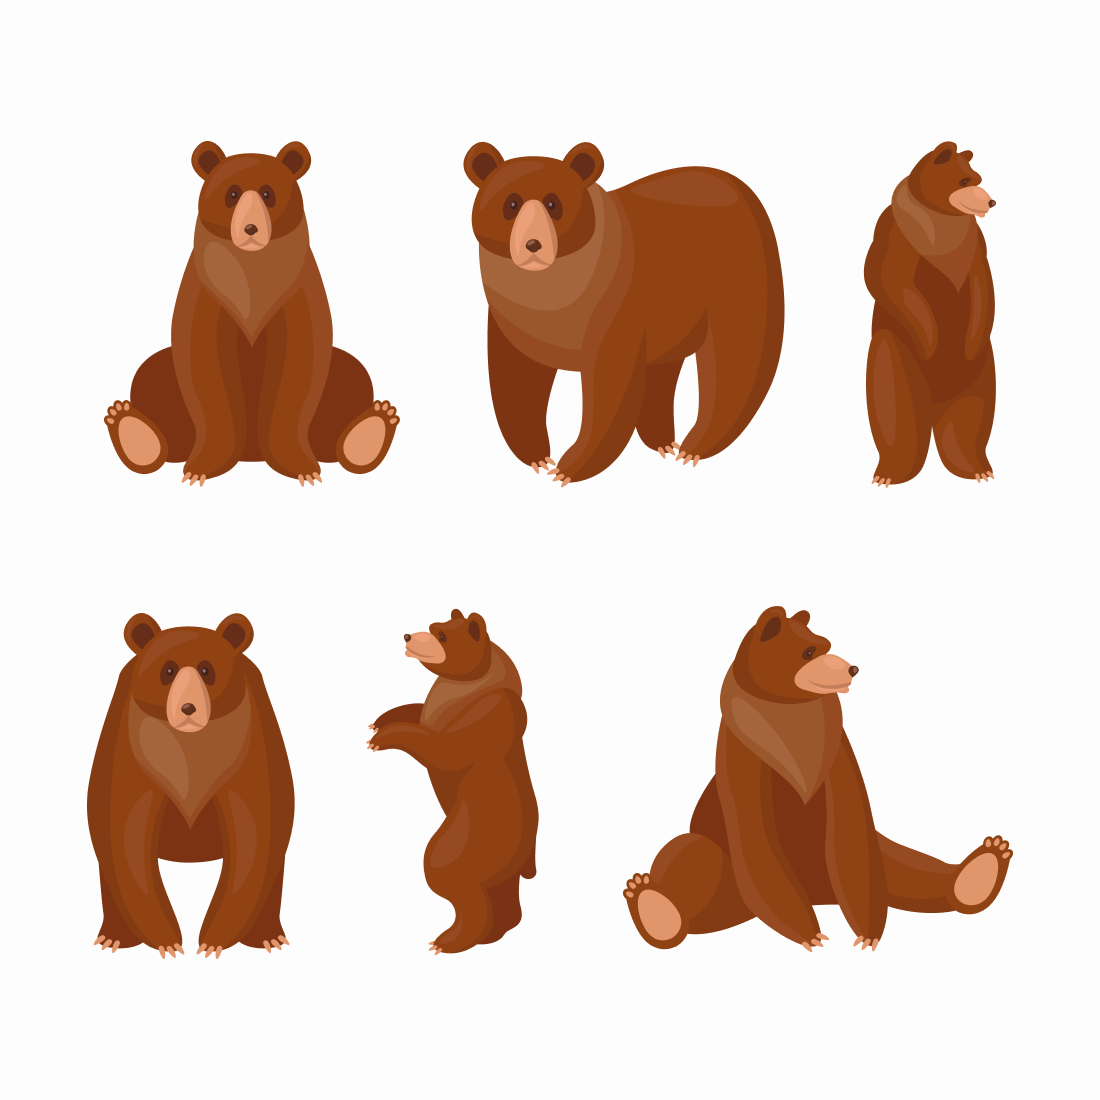 Set of brown bears sitting and standing.